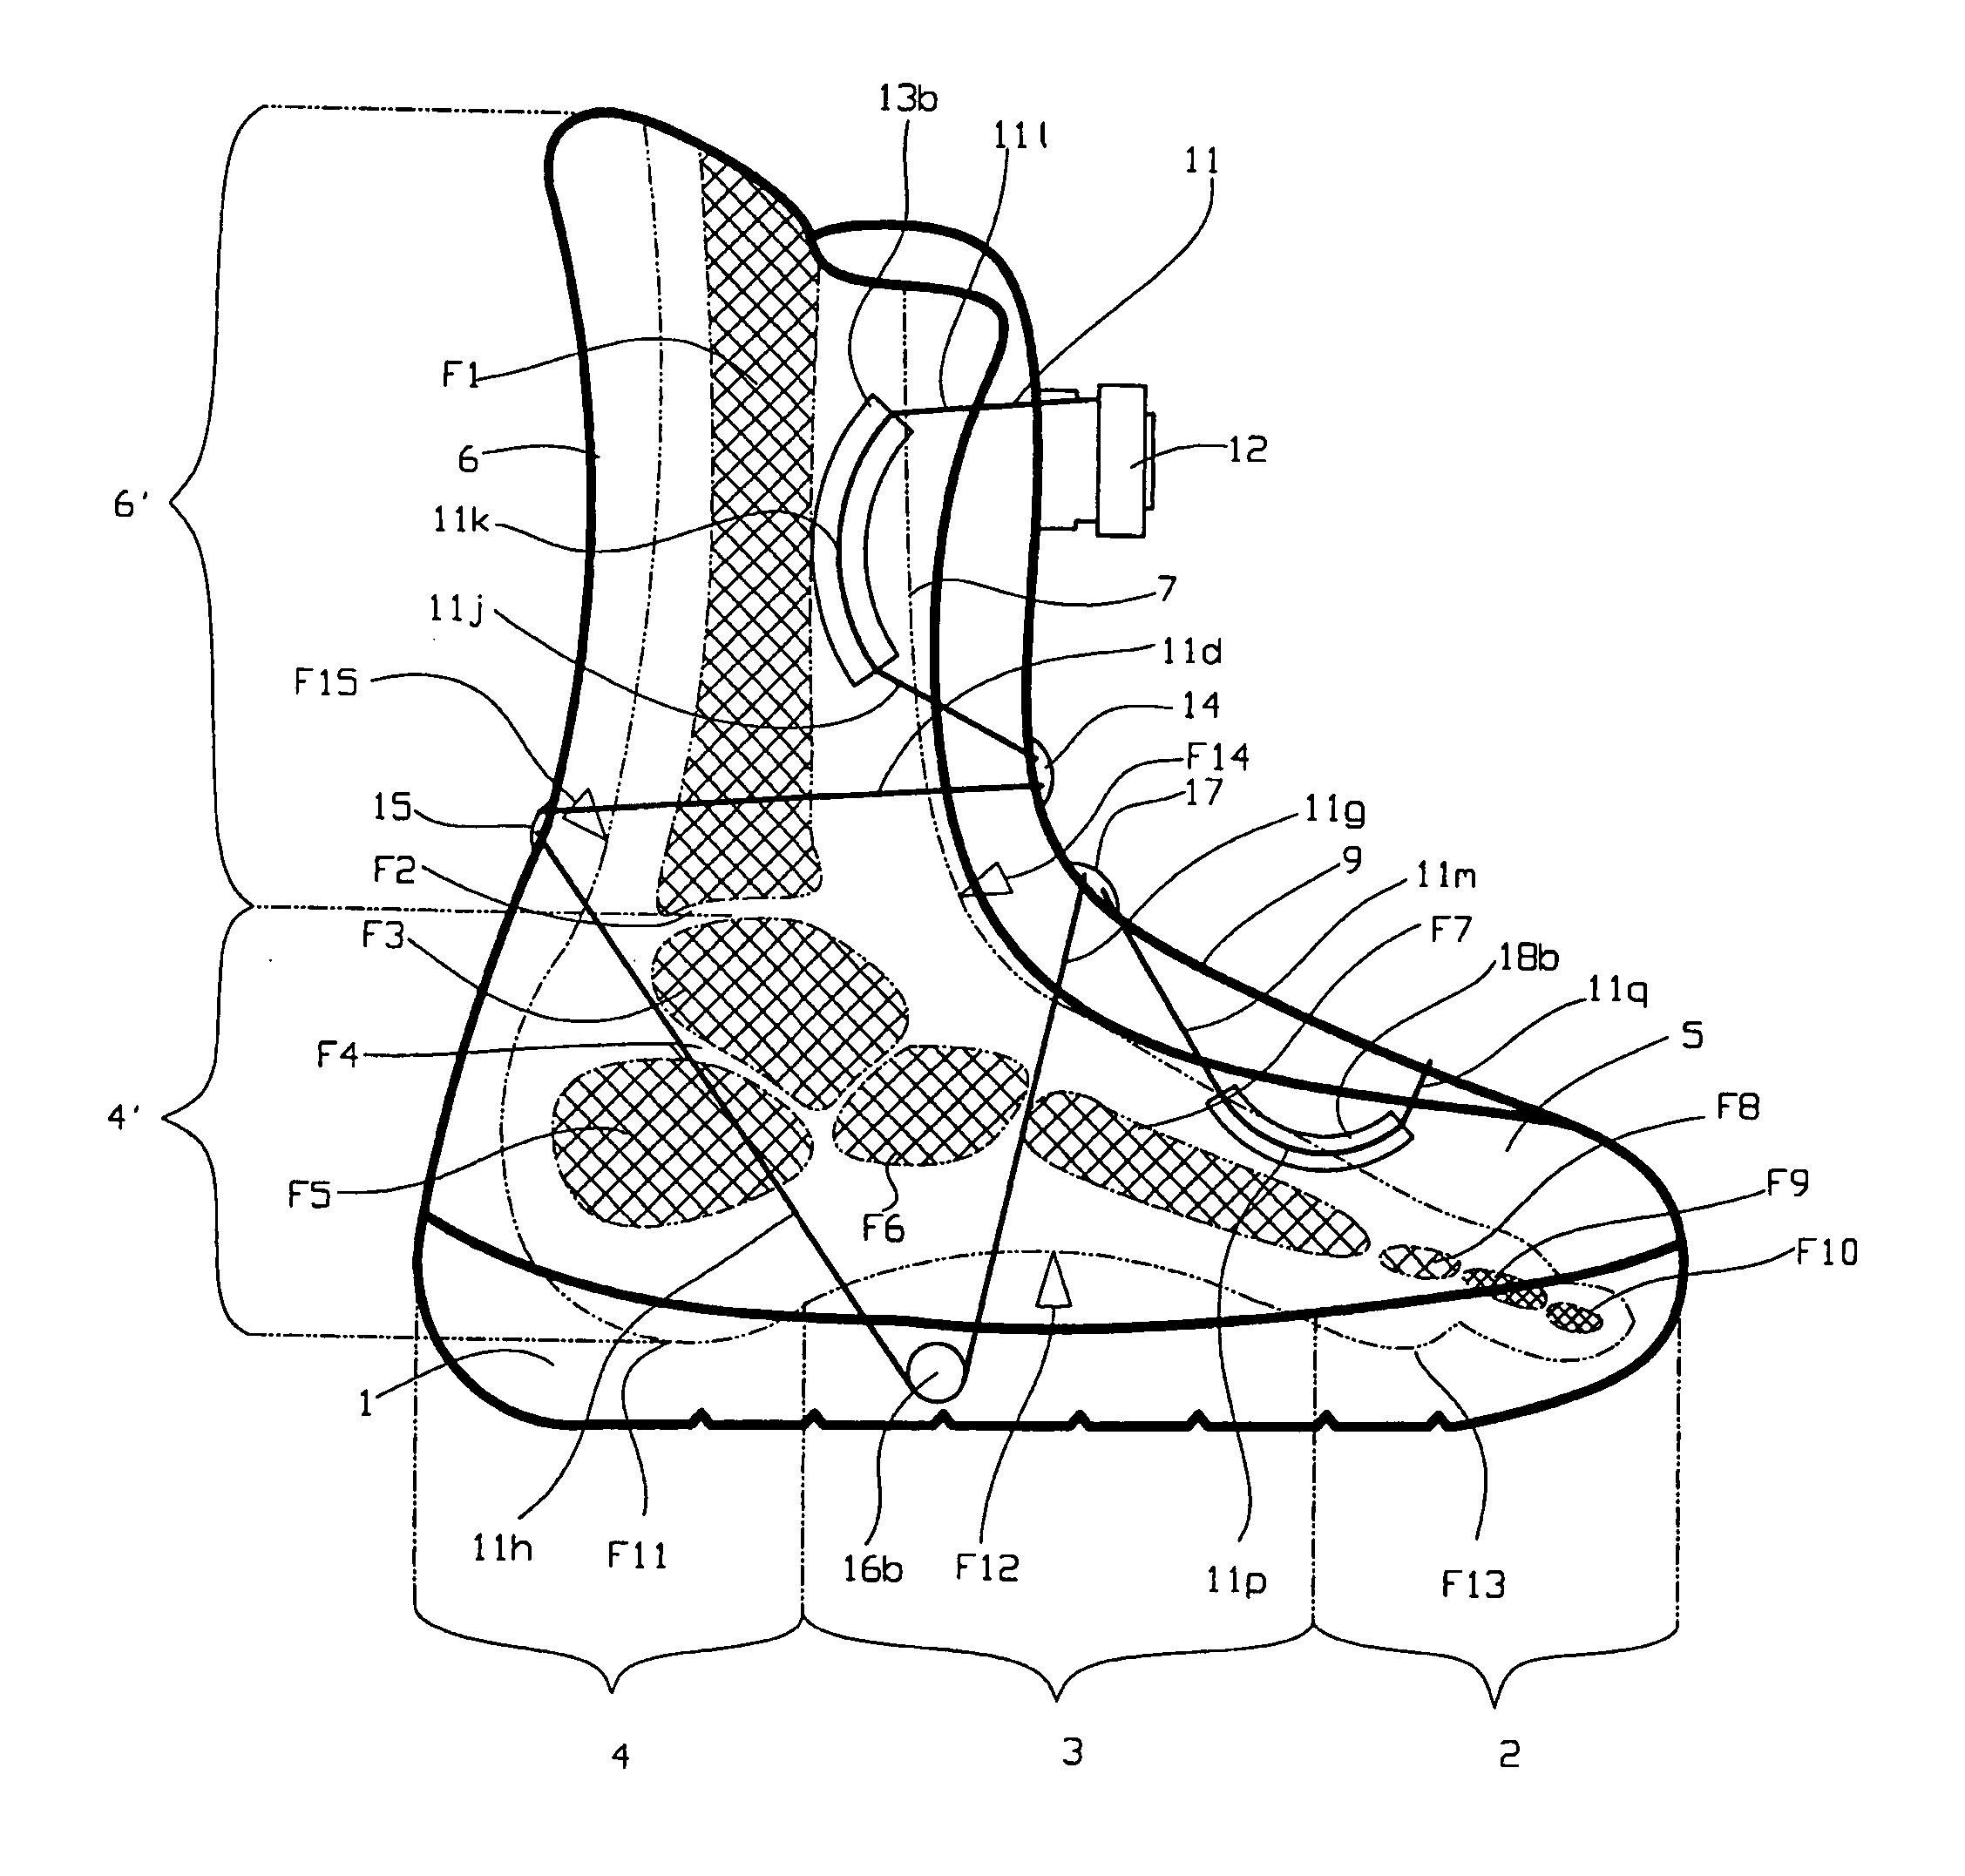 Laced boot